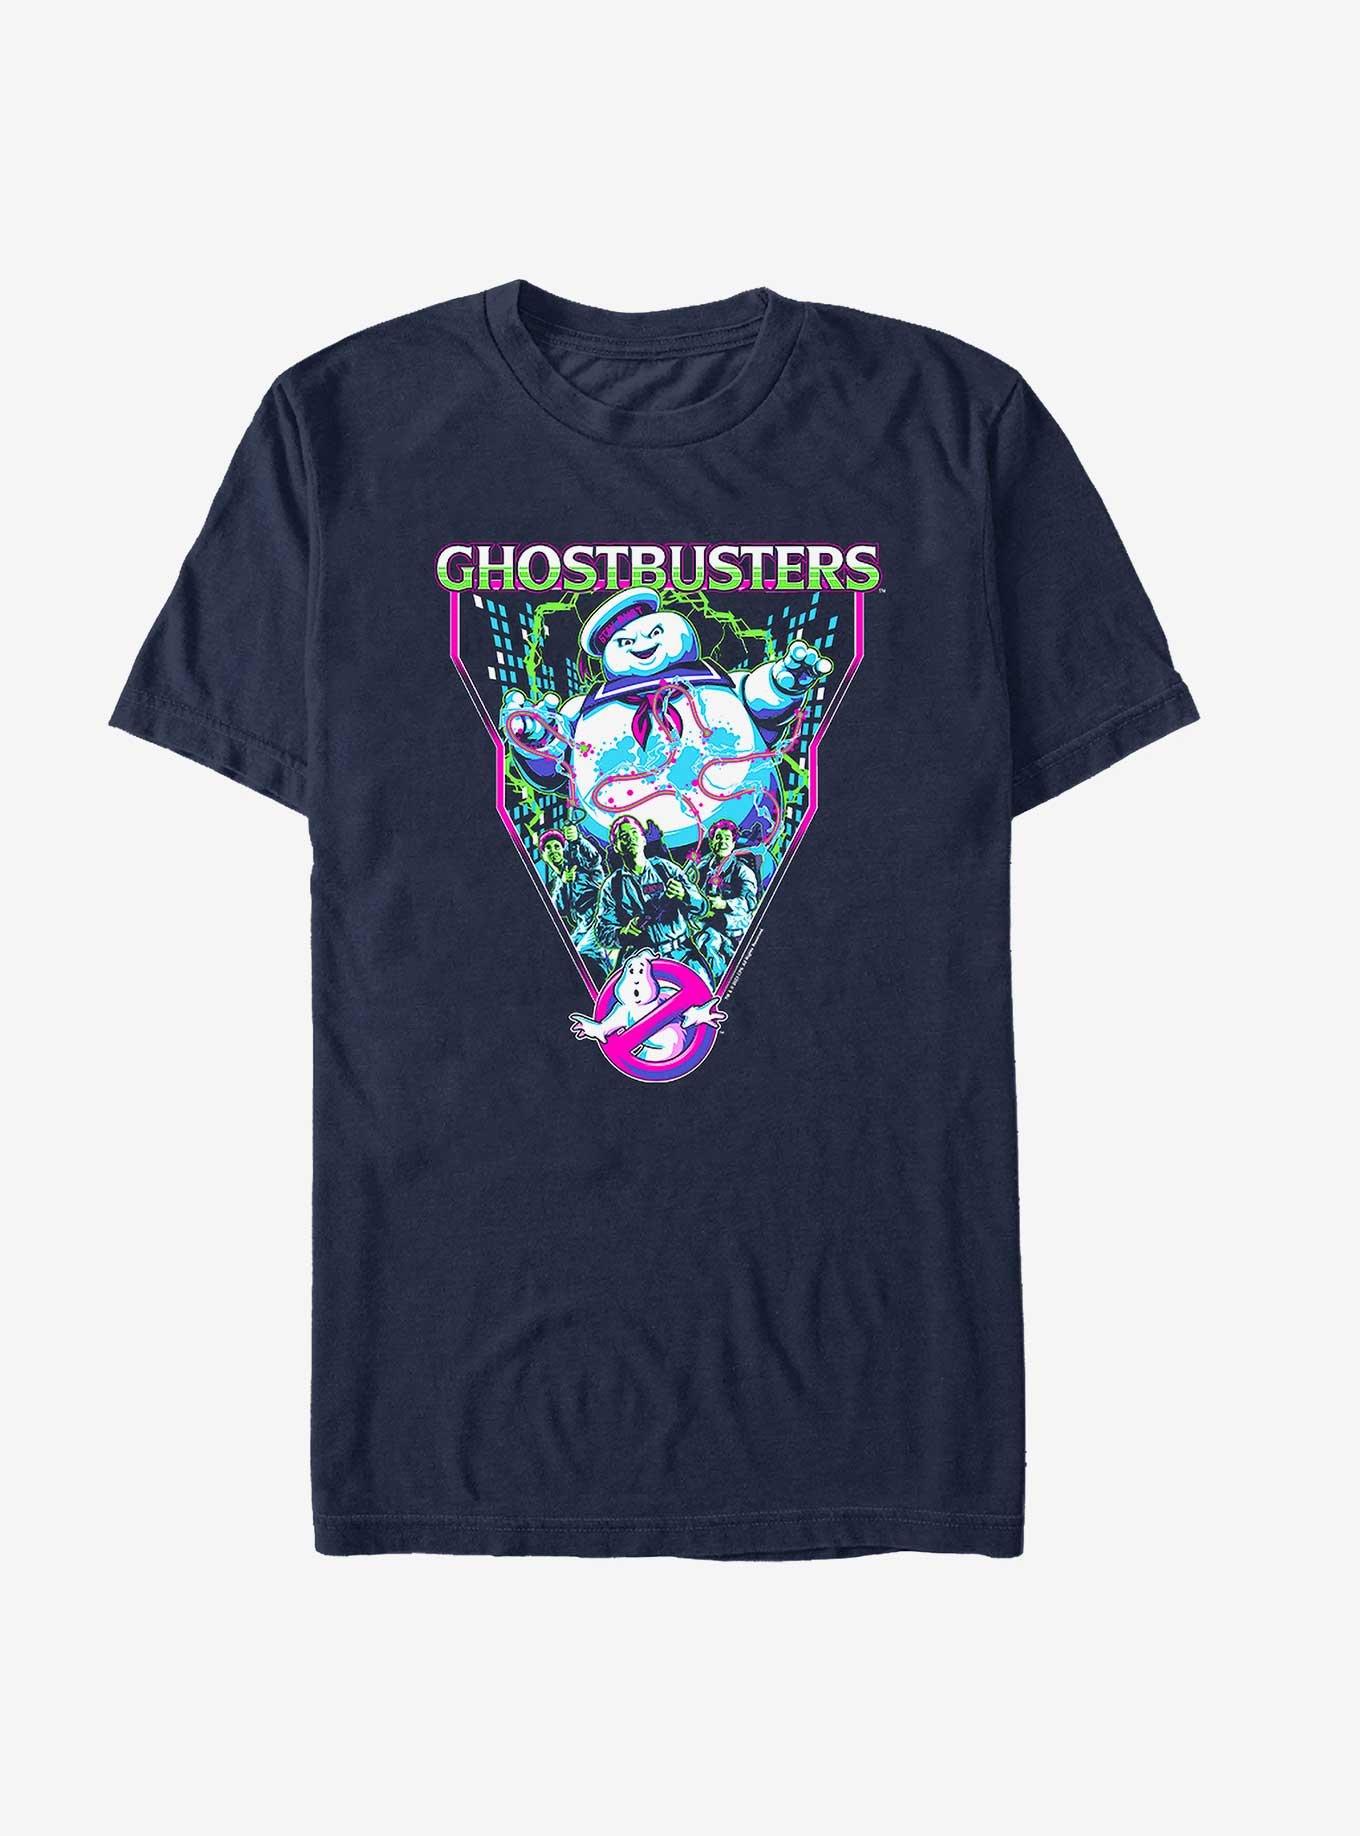 Ghostbusters: Frozen Empire Ghostblasters T-Shirt, NAVY, hi-res